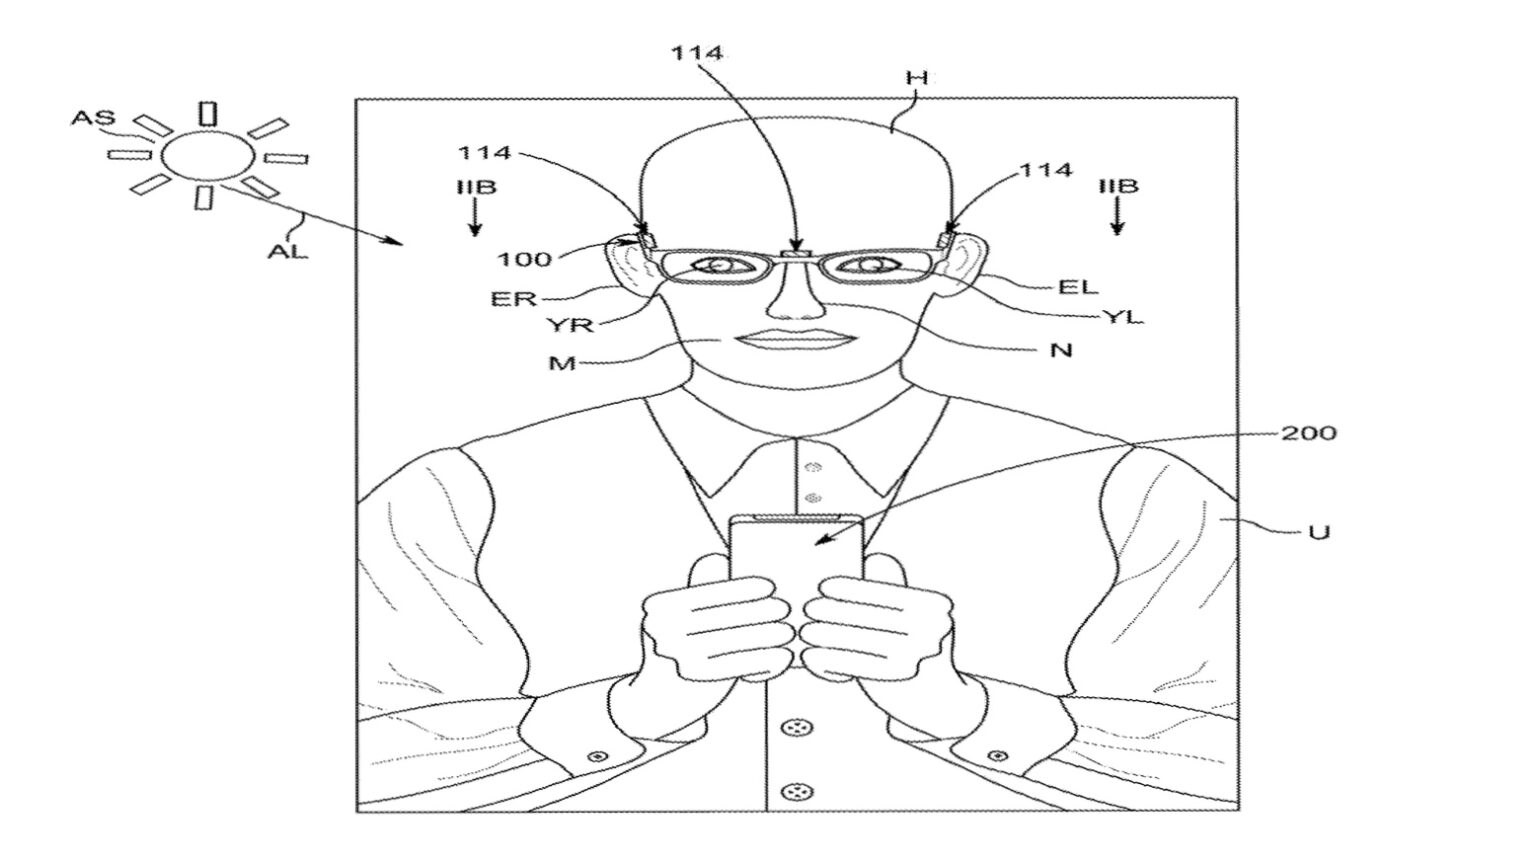 A patent shows what Apple Glass AR glasses might look like.